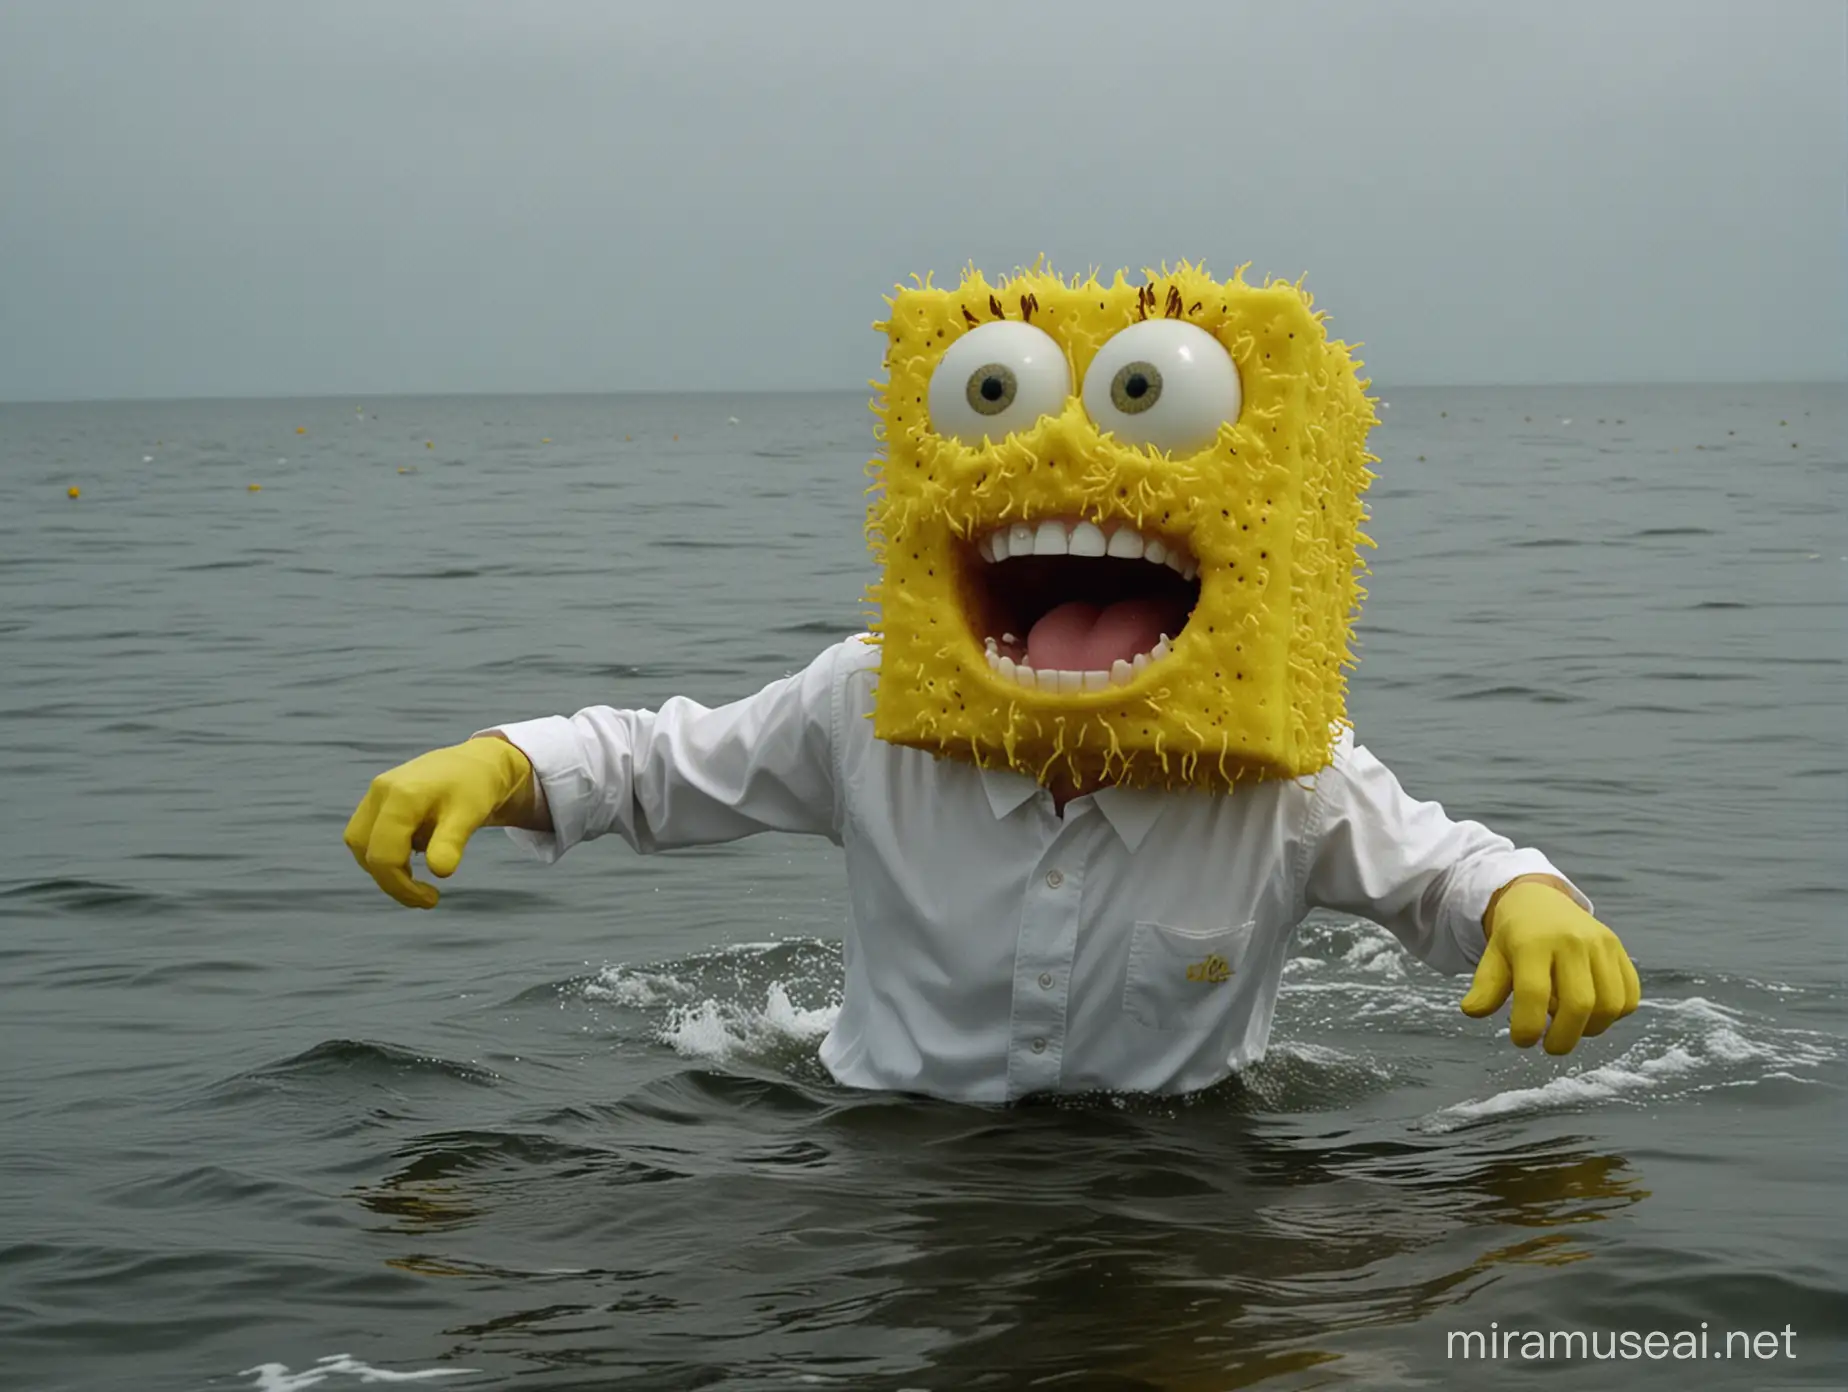 2000s horror movie, dvd screengrab of a yellow sponge with yellow eyes, yellow arms, open mouth with white sharp teeths, white shirt, brown pants, in the ocean